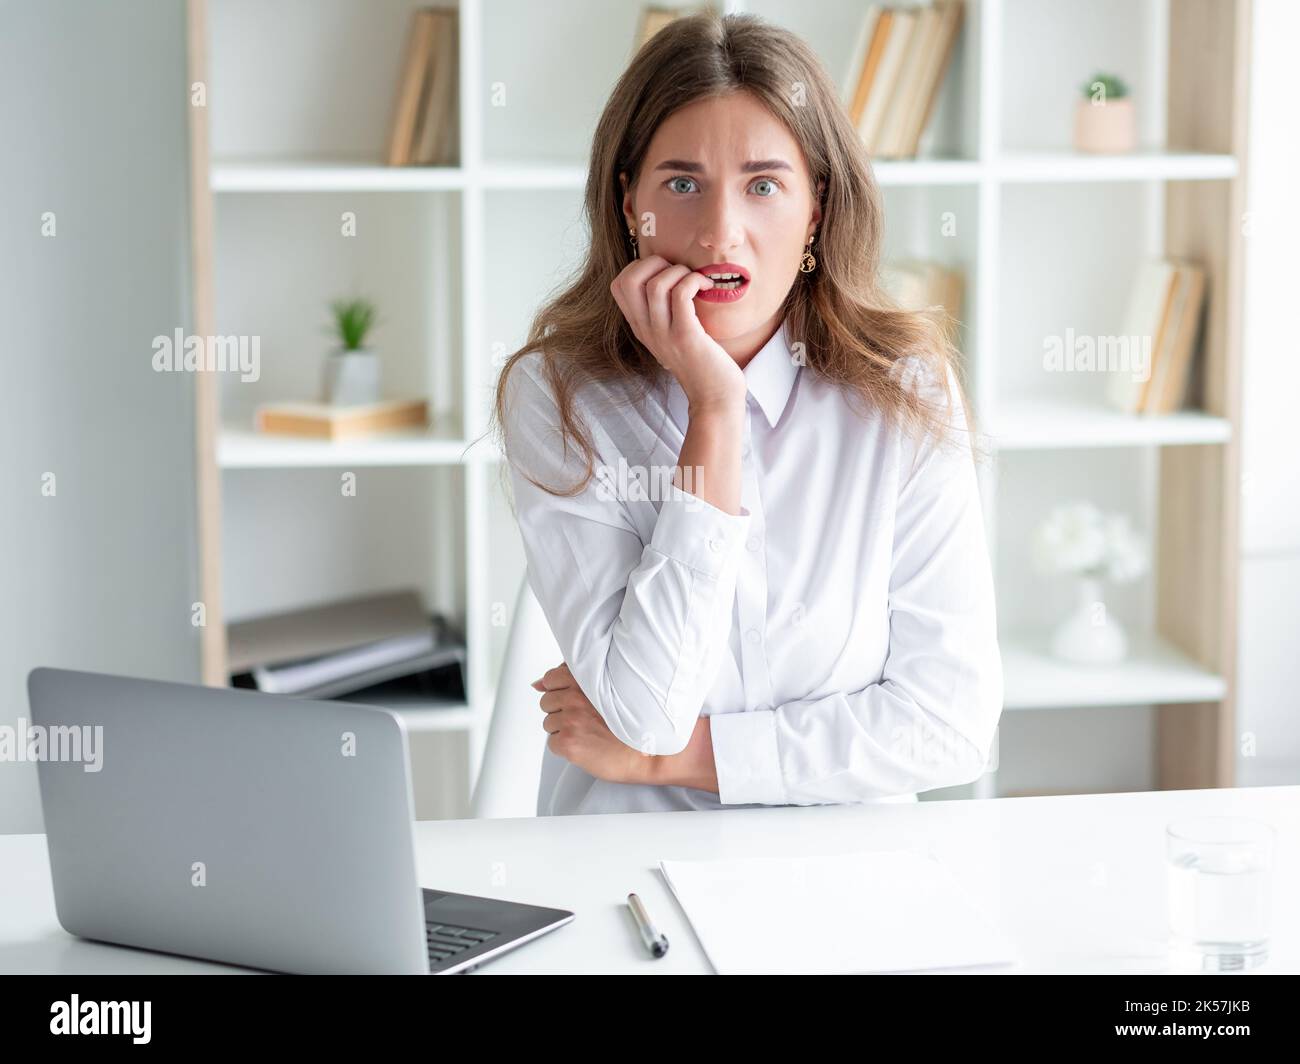 scary emotion worried woman work problem frighten Stock Photo